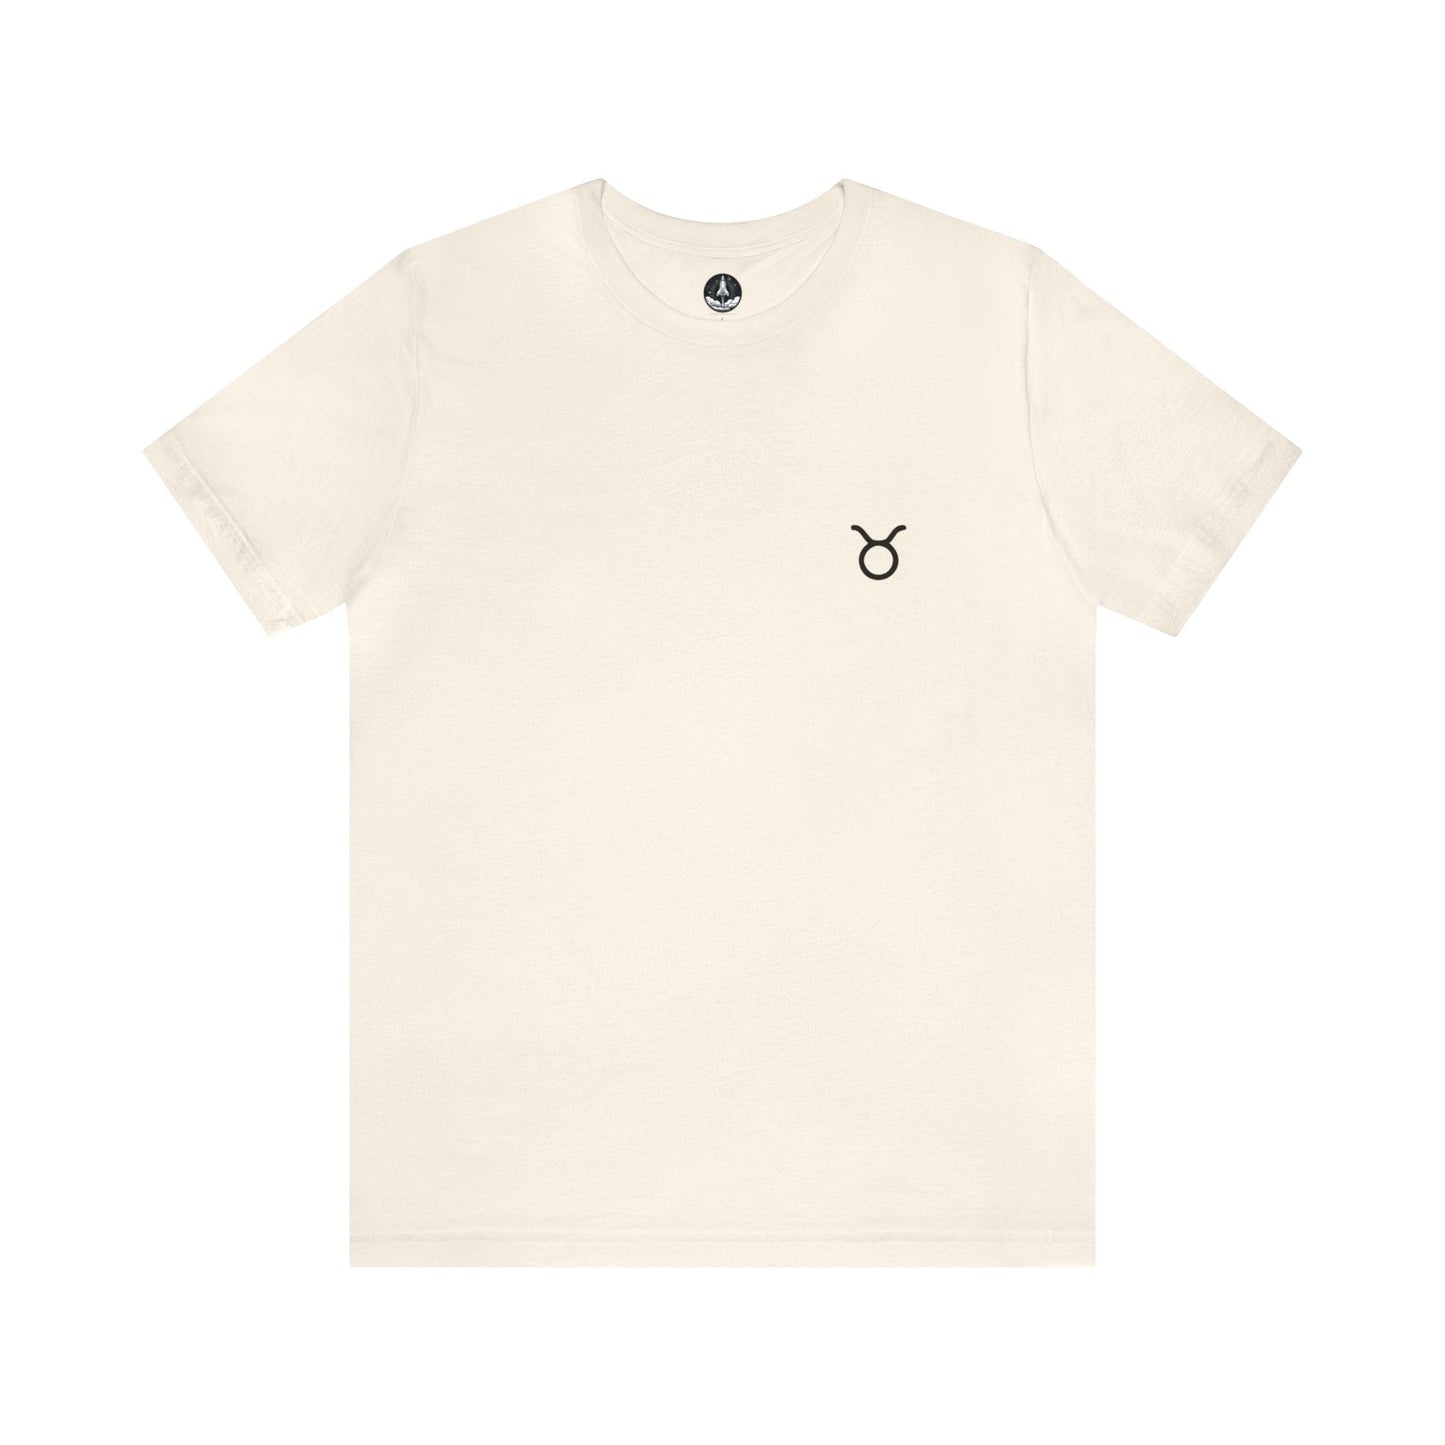 T-Shirt Natural / S Taurus Zodiac Essence T-Shirt: Sophistication Meets Comfort for the Grounded Soul